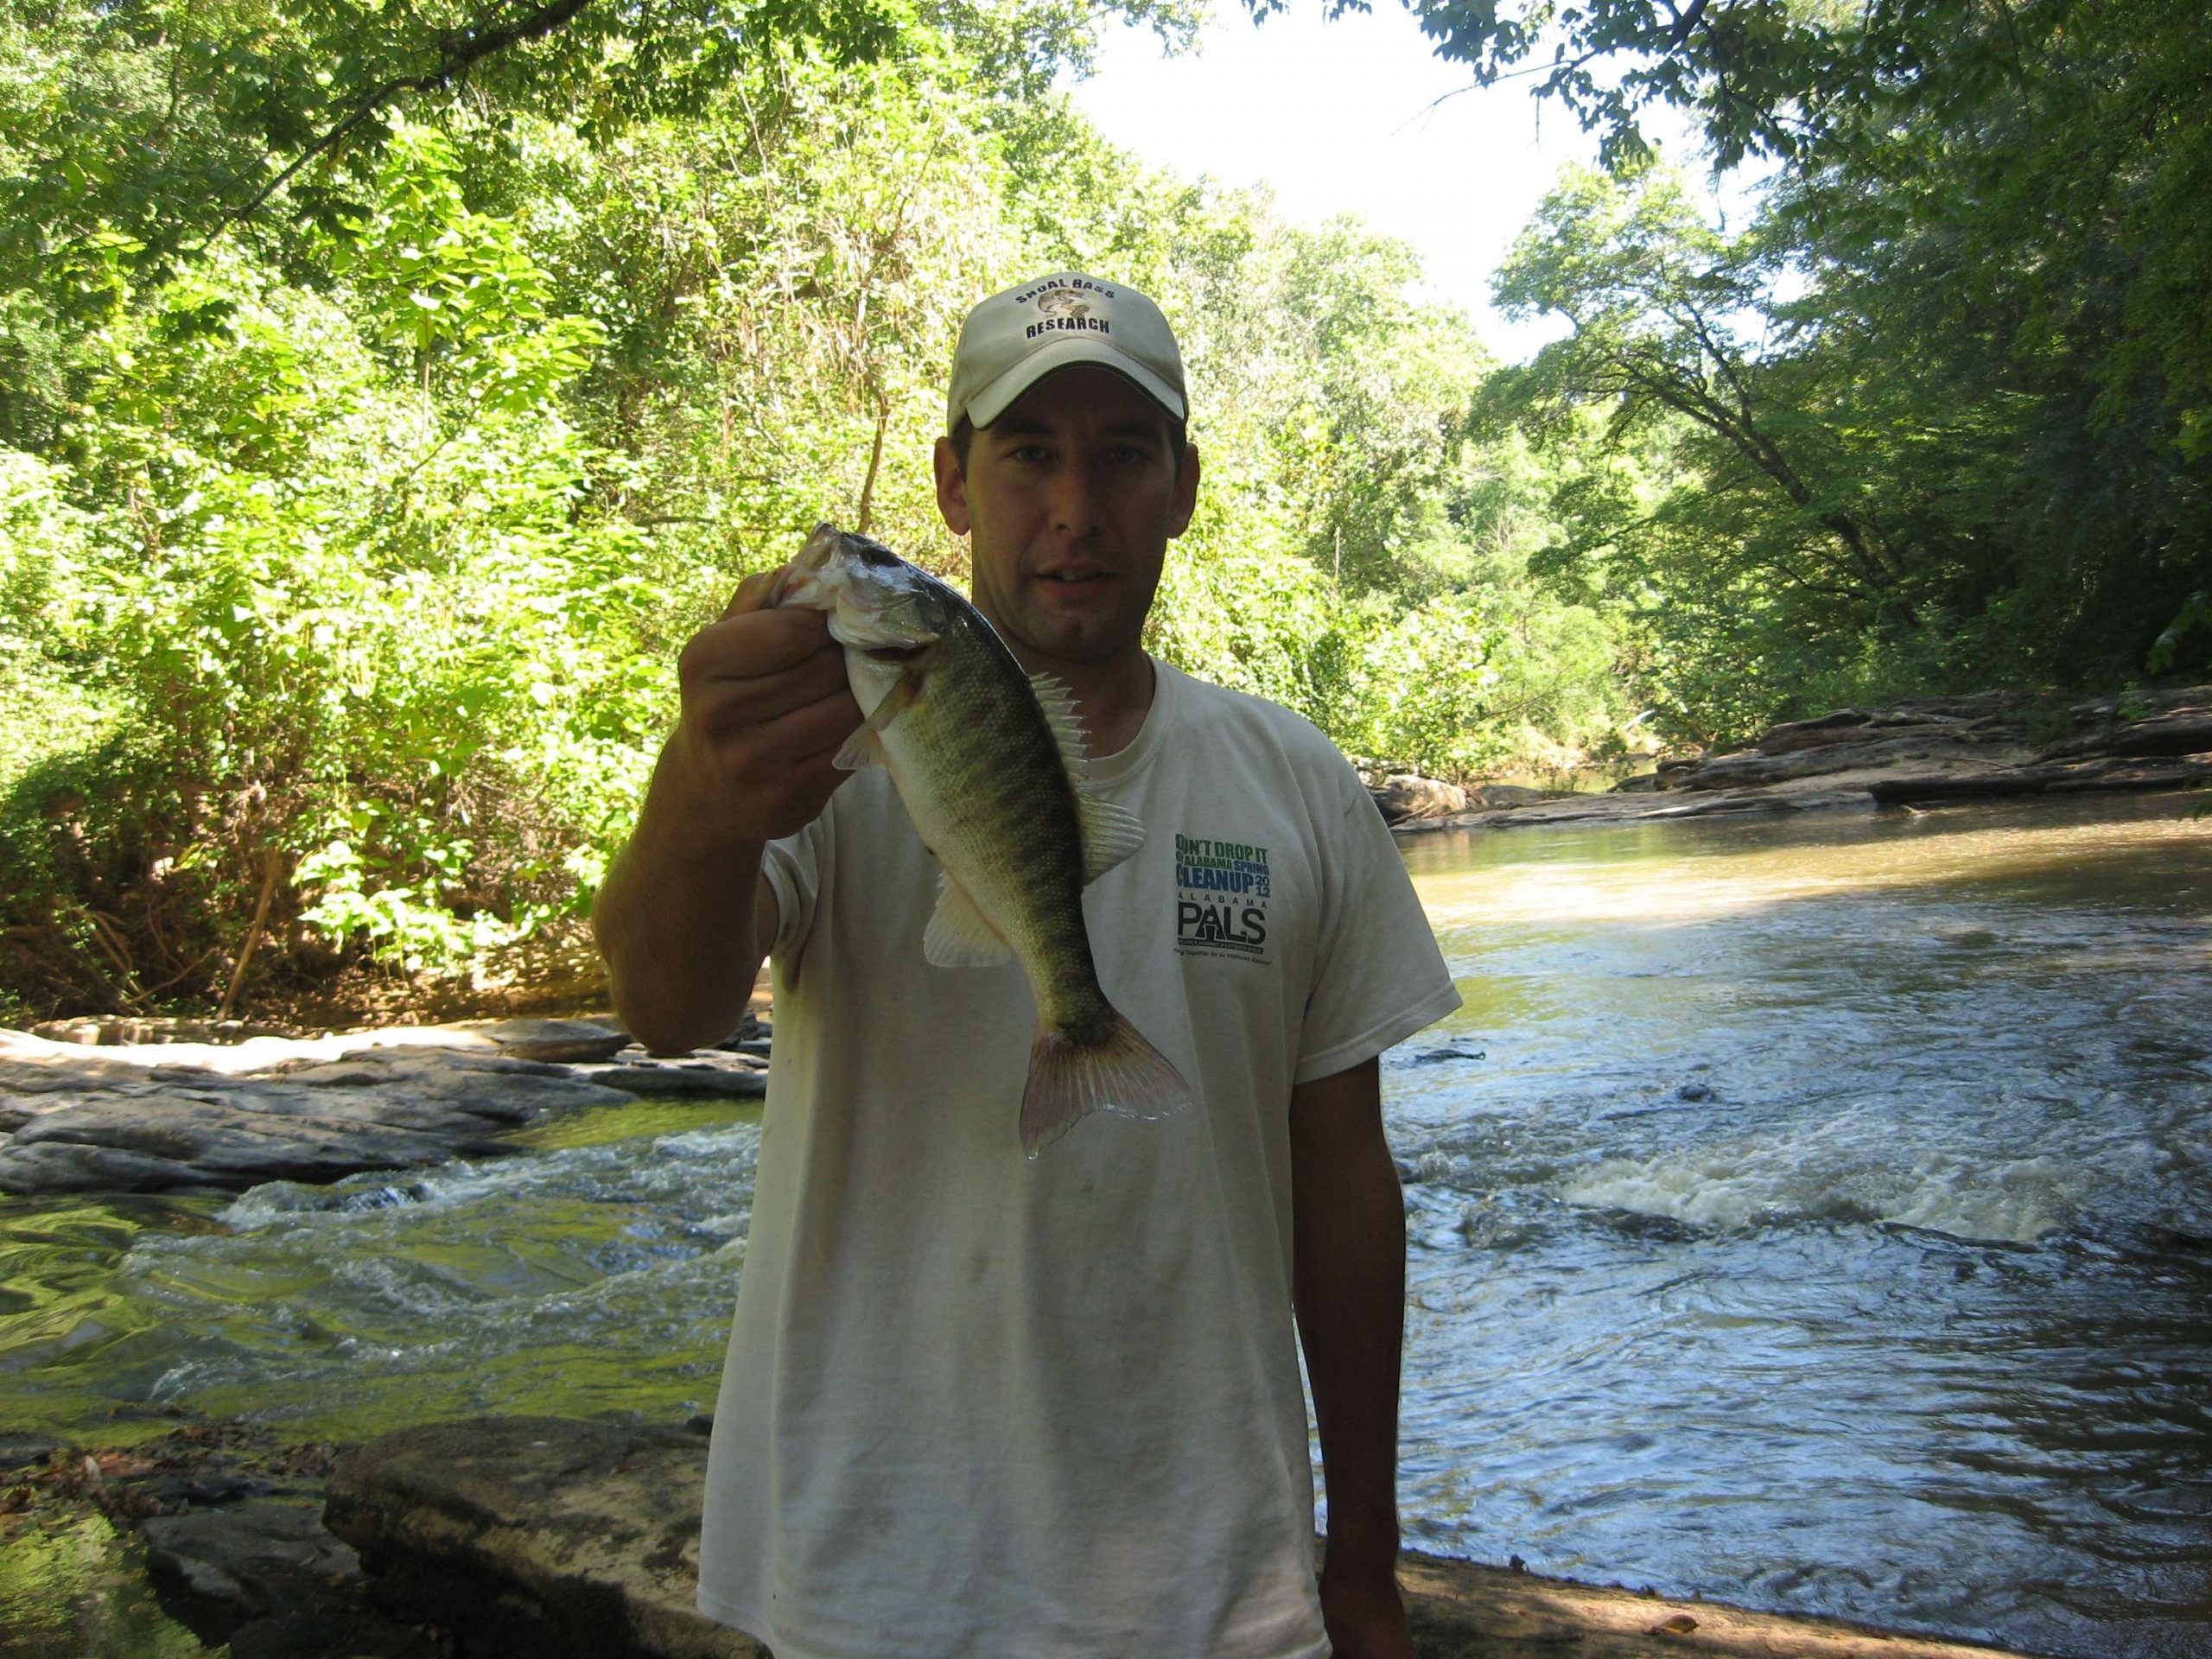 Shoal bass were part of his first expanded slam, in which he caught shoals in Alabama, Georgia and Florida.